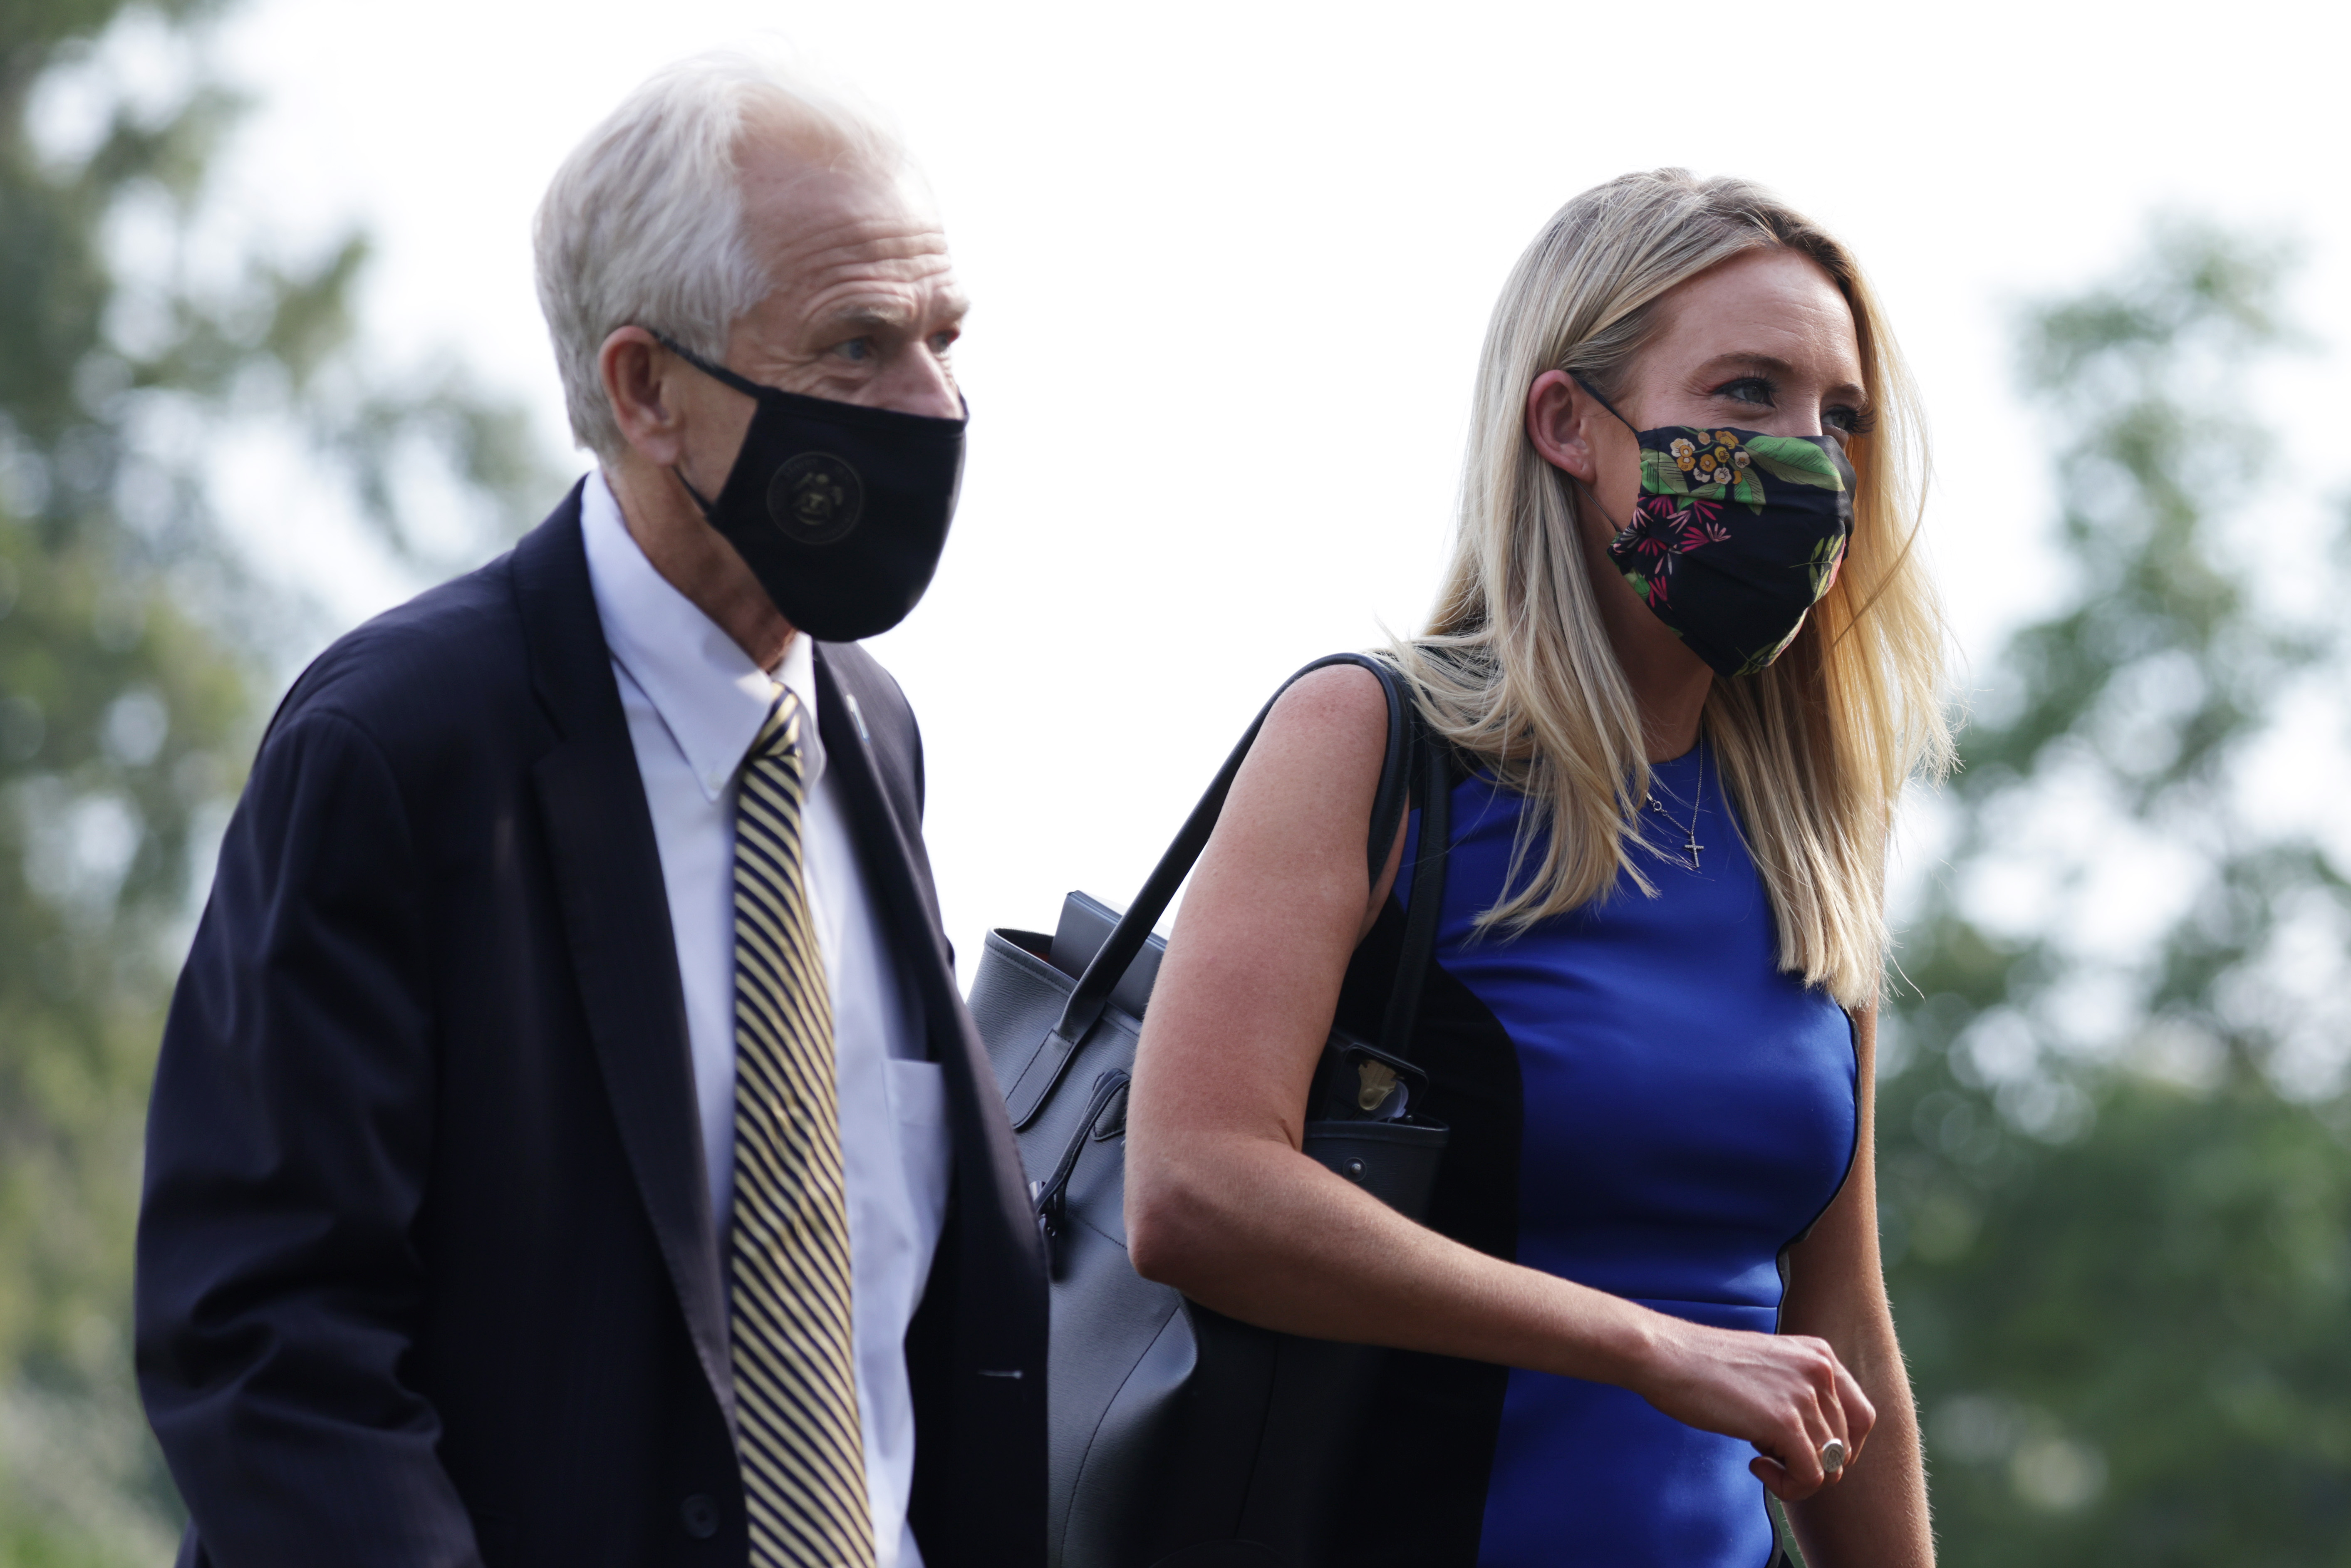 WASHINGTON, DC - JULY 27: White House Trade Adviser Peter Navarro and White House Press Secretary Kayleigh McEnany walk on the South Lawn after landing aboard Marine One at the White House from a trip with President Donald Trump July 27, 2020 in Washington, DC. Trump was returning from a visit to the FUJIFILM Diosynth Biotechnologies' Innovation Center in Morrisville, North Carolina, a facility that supports manufacturing of "key components of the COVID-19 vaccine candidate" developed by Novavax. (Photo by Alex Wong/Getty Images)